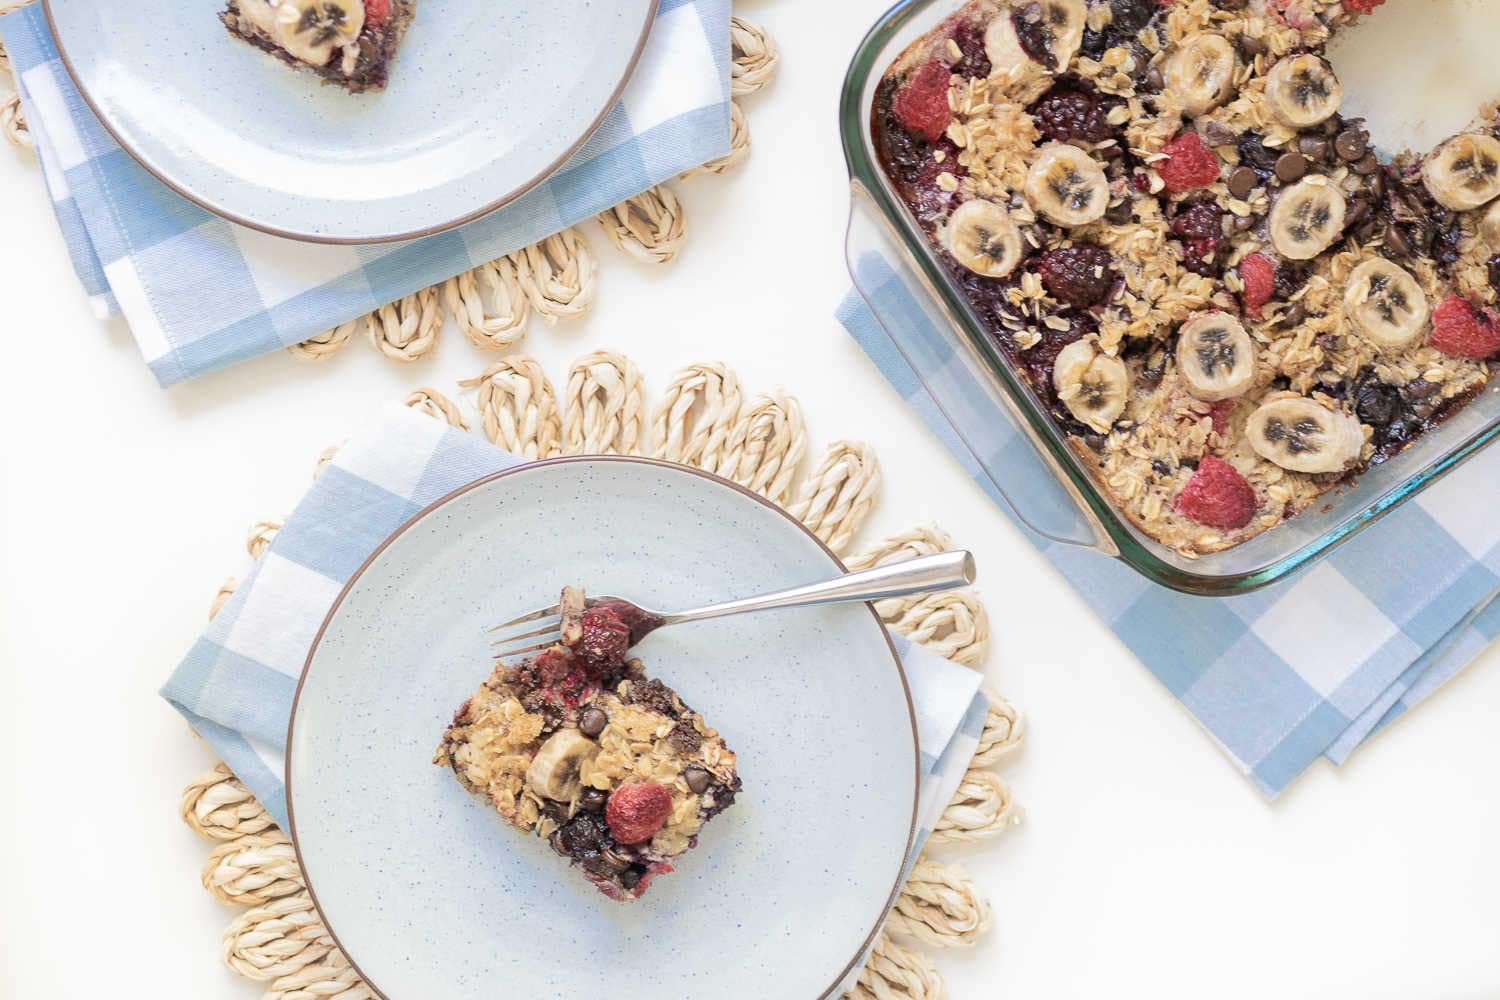 Blogger Stephanie Ziajka shares her favorite healthy breakfast meal prep recipe on Diary of a Debutante